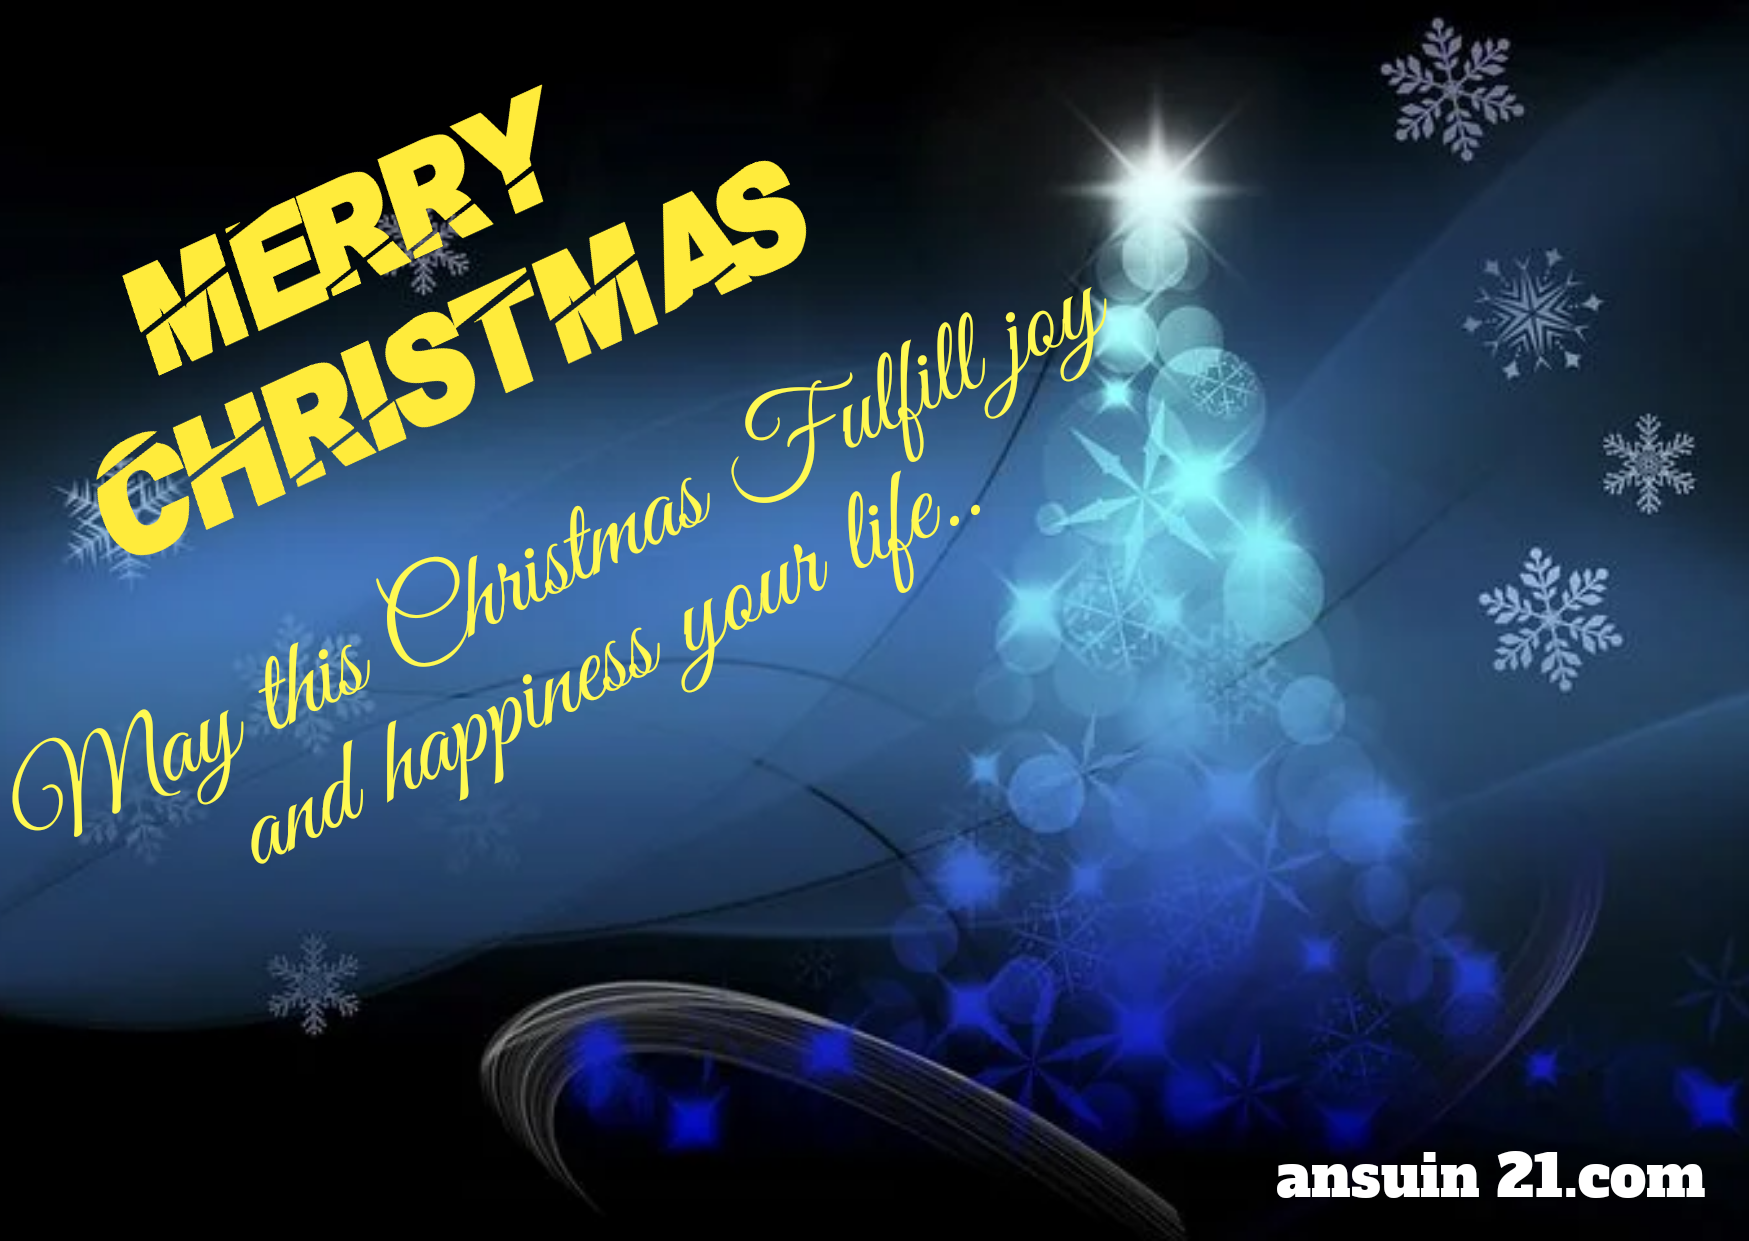 Merry Christmas Wishes, Images, Status, Quotes, HD Wallpaper